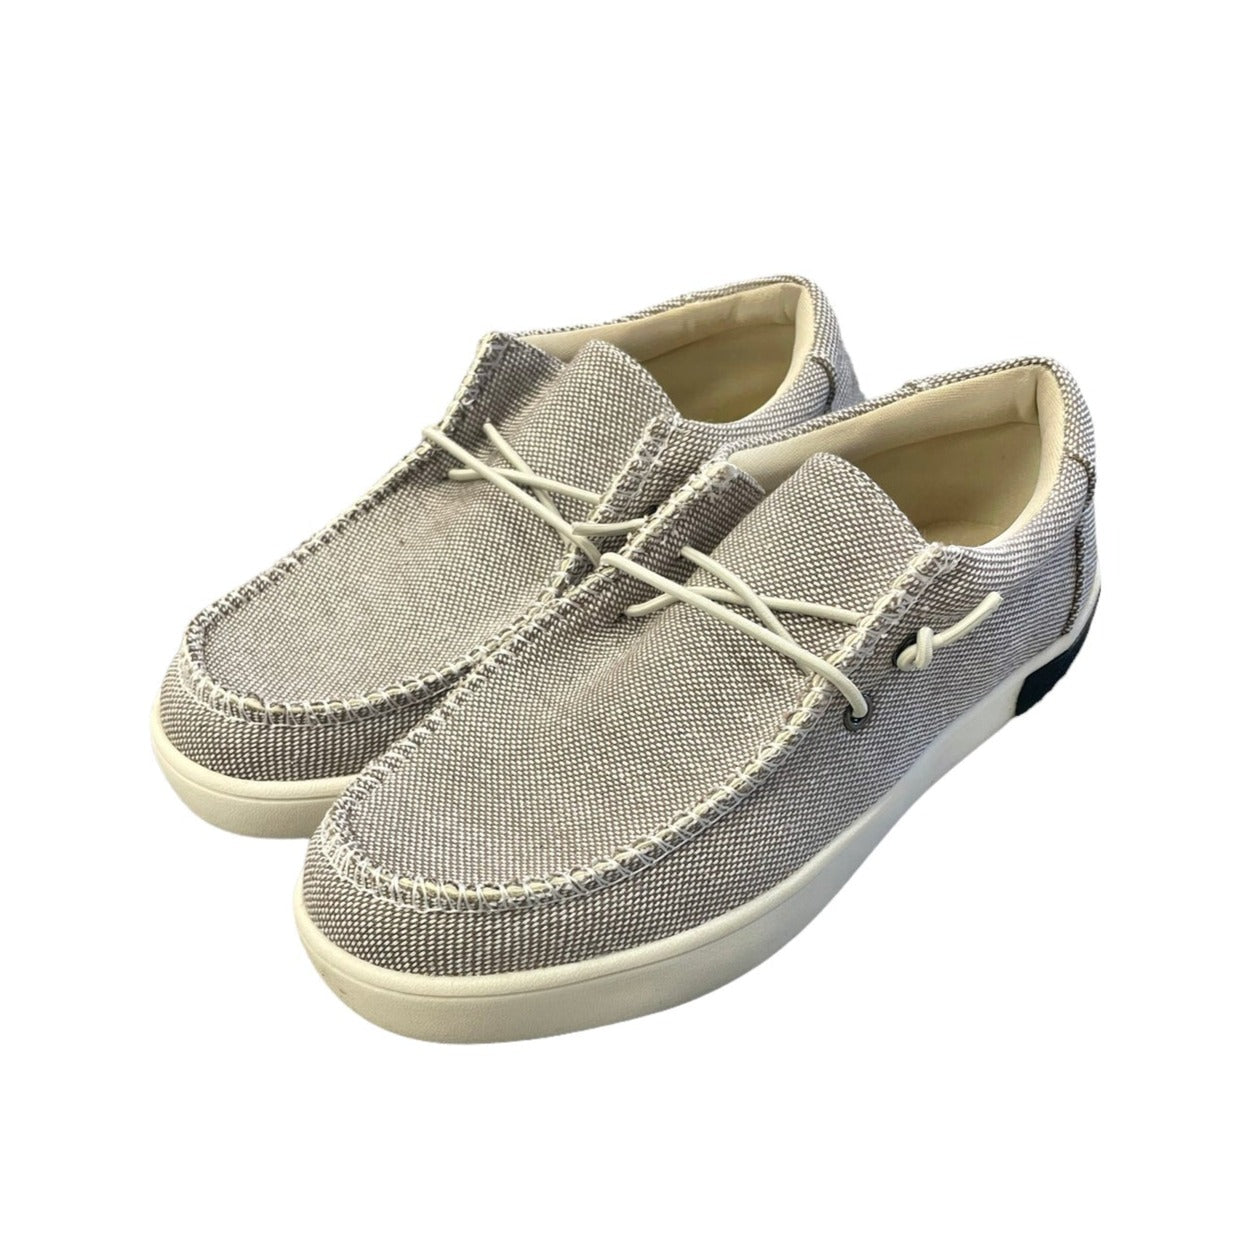 Conorr Light Grey Slip On Canvas Boat Shoes